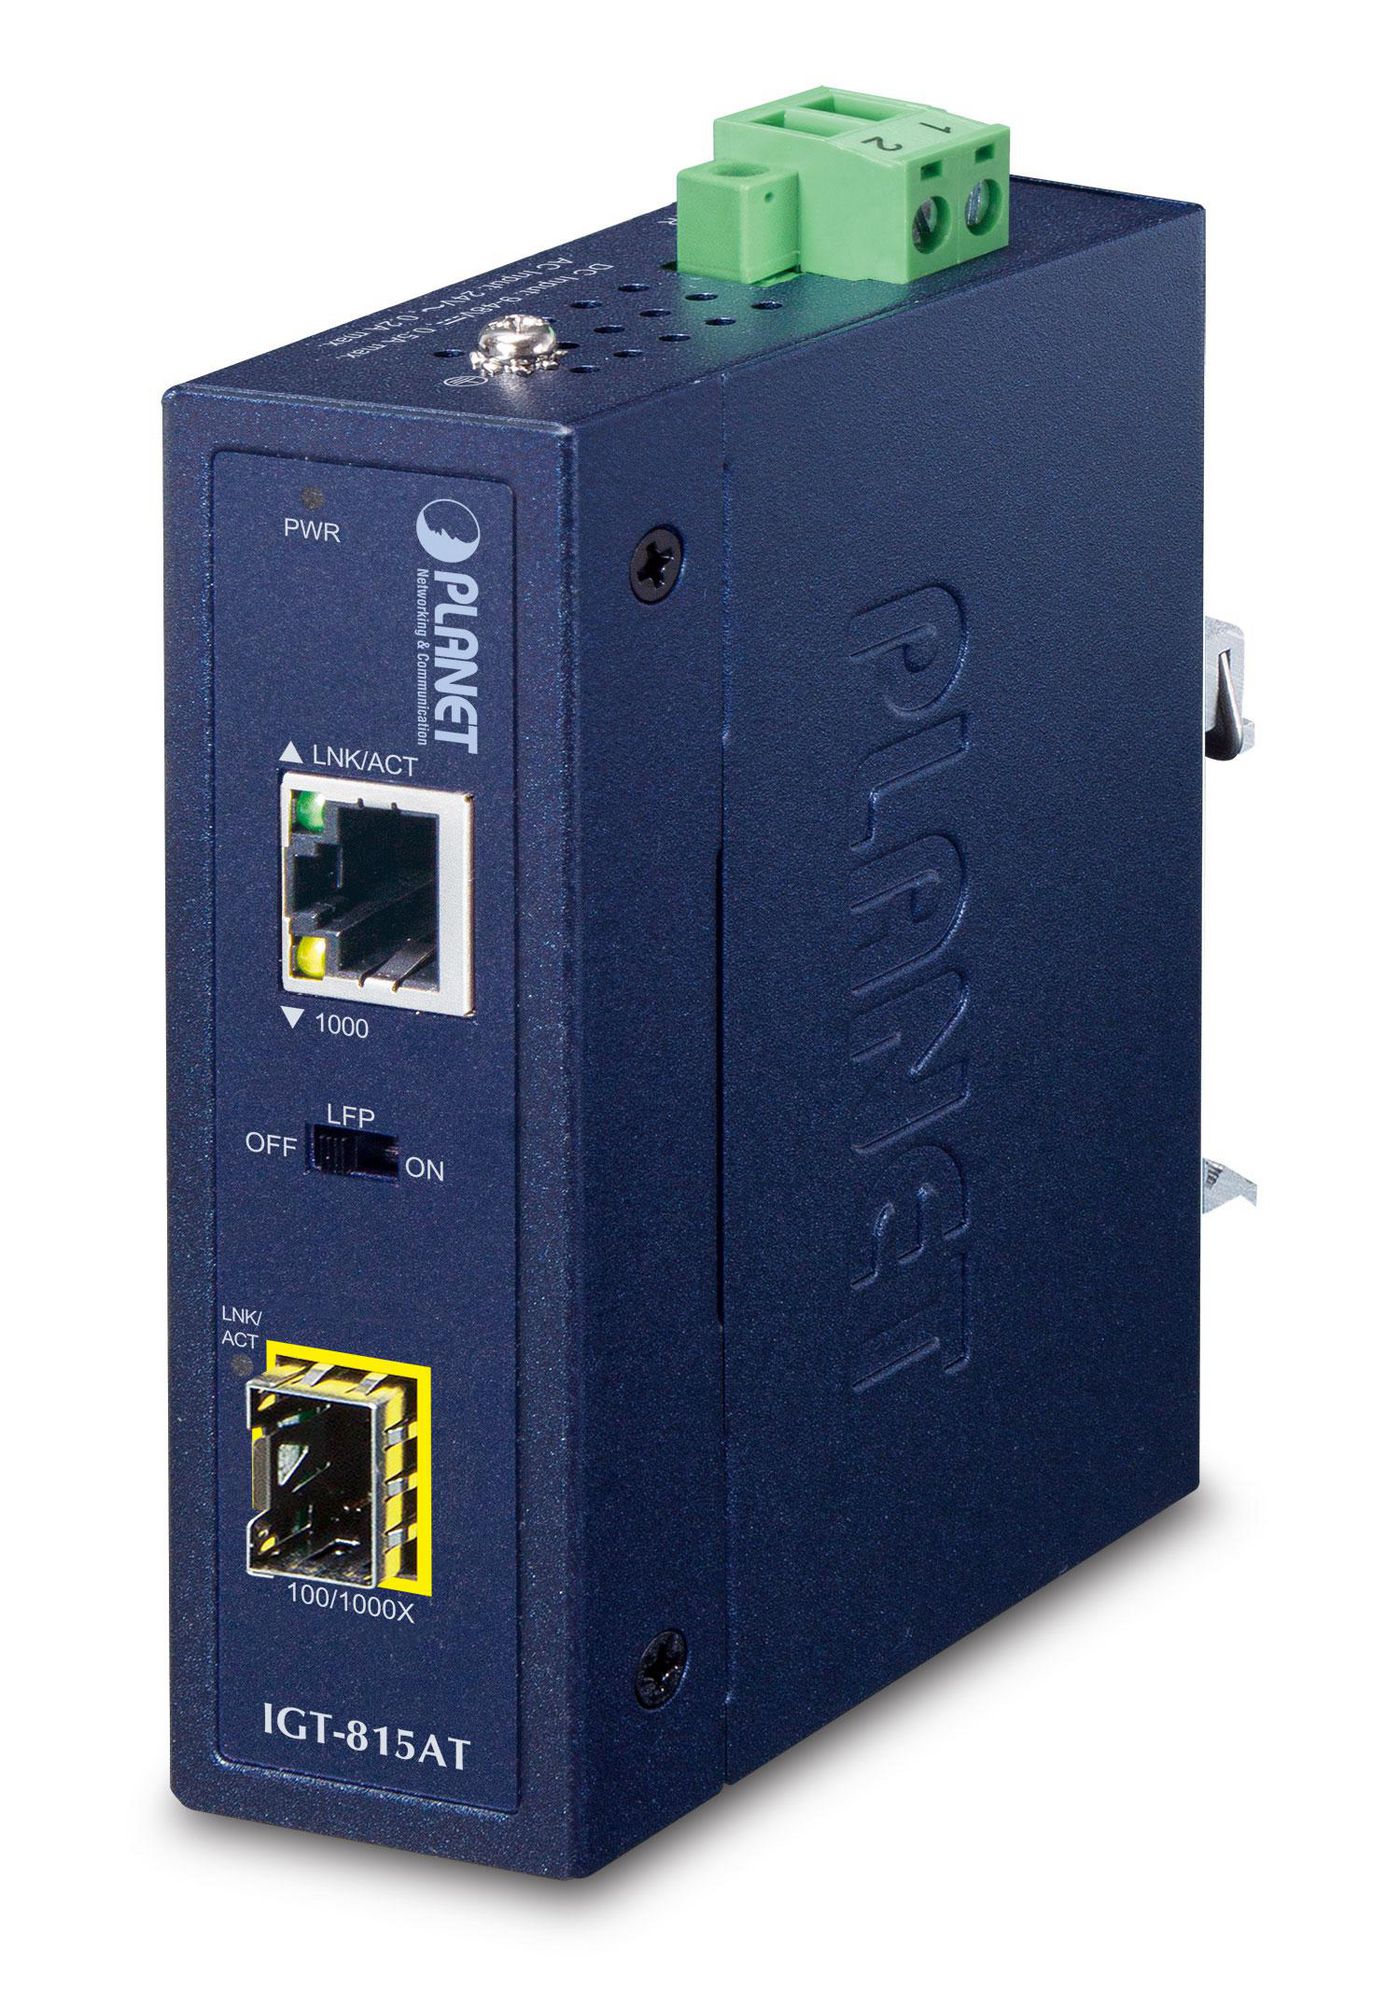 Planet IGT-815AT IP30 Compact size Industrial 